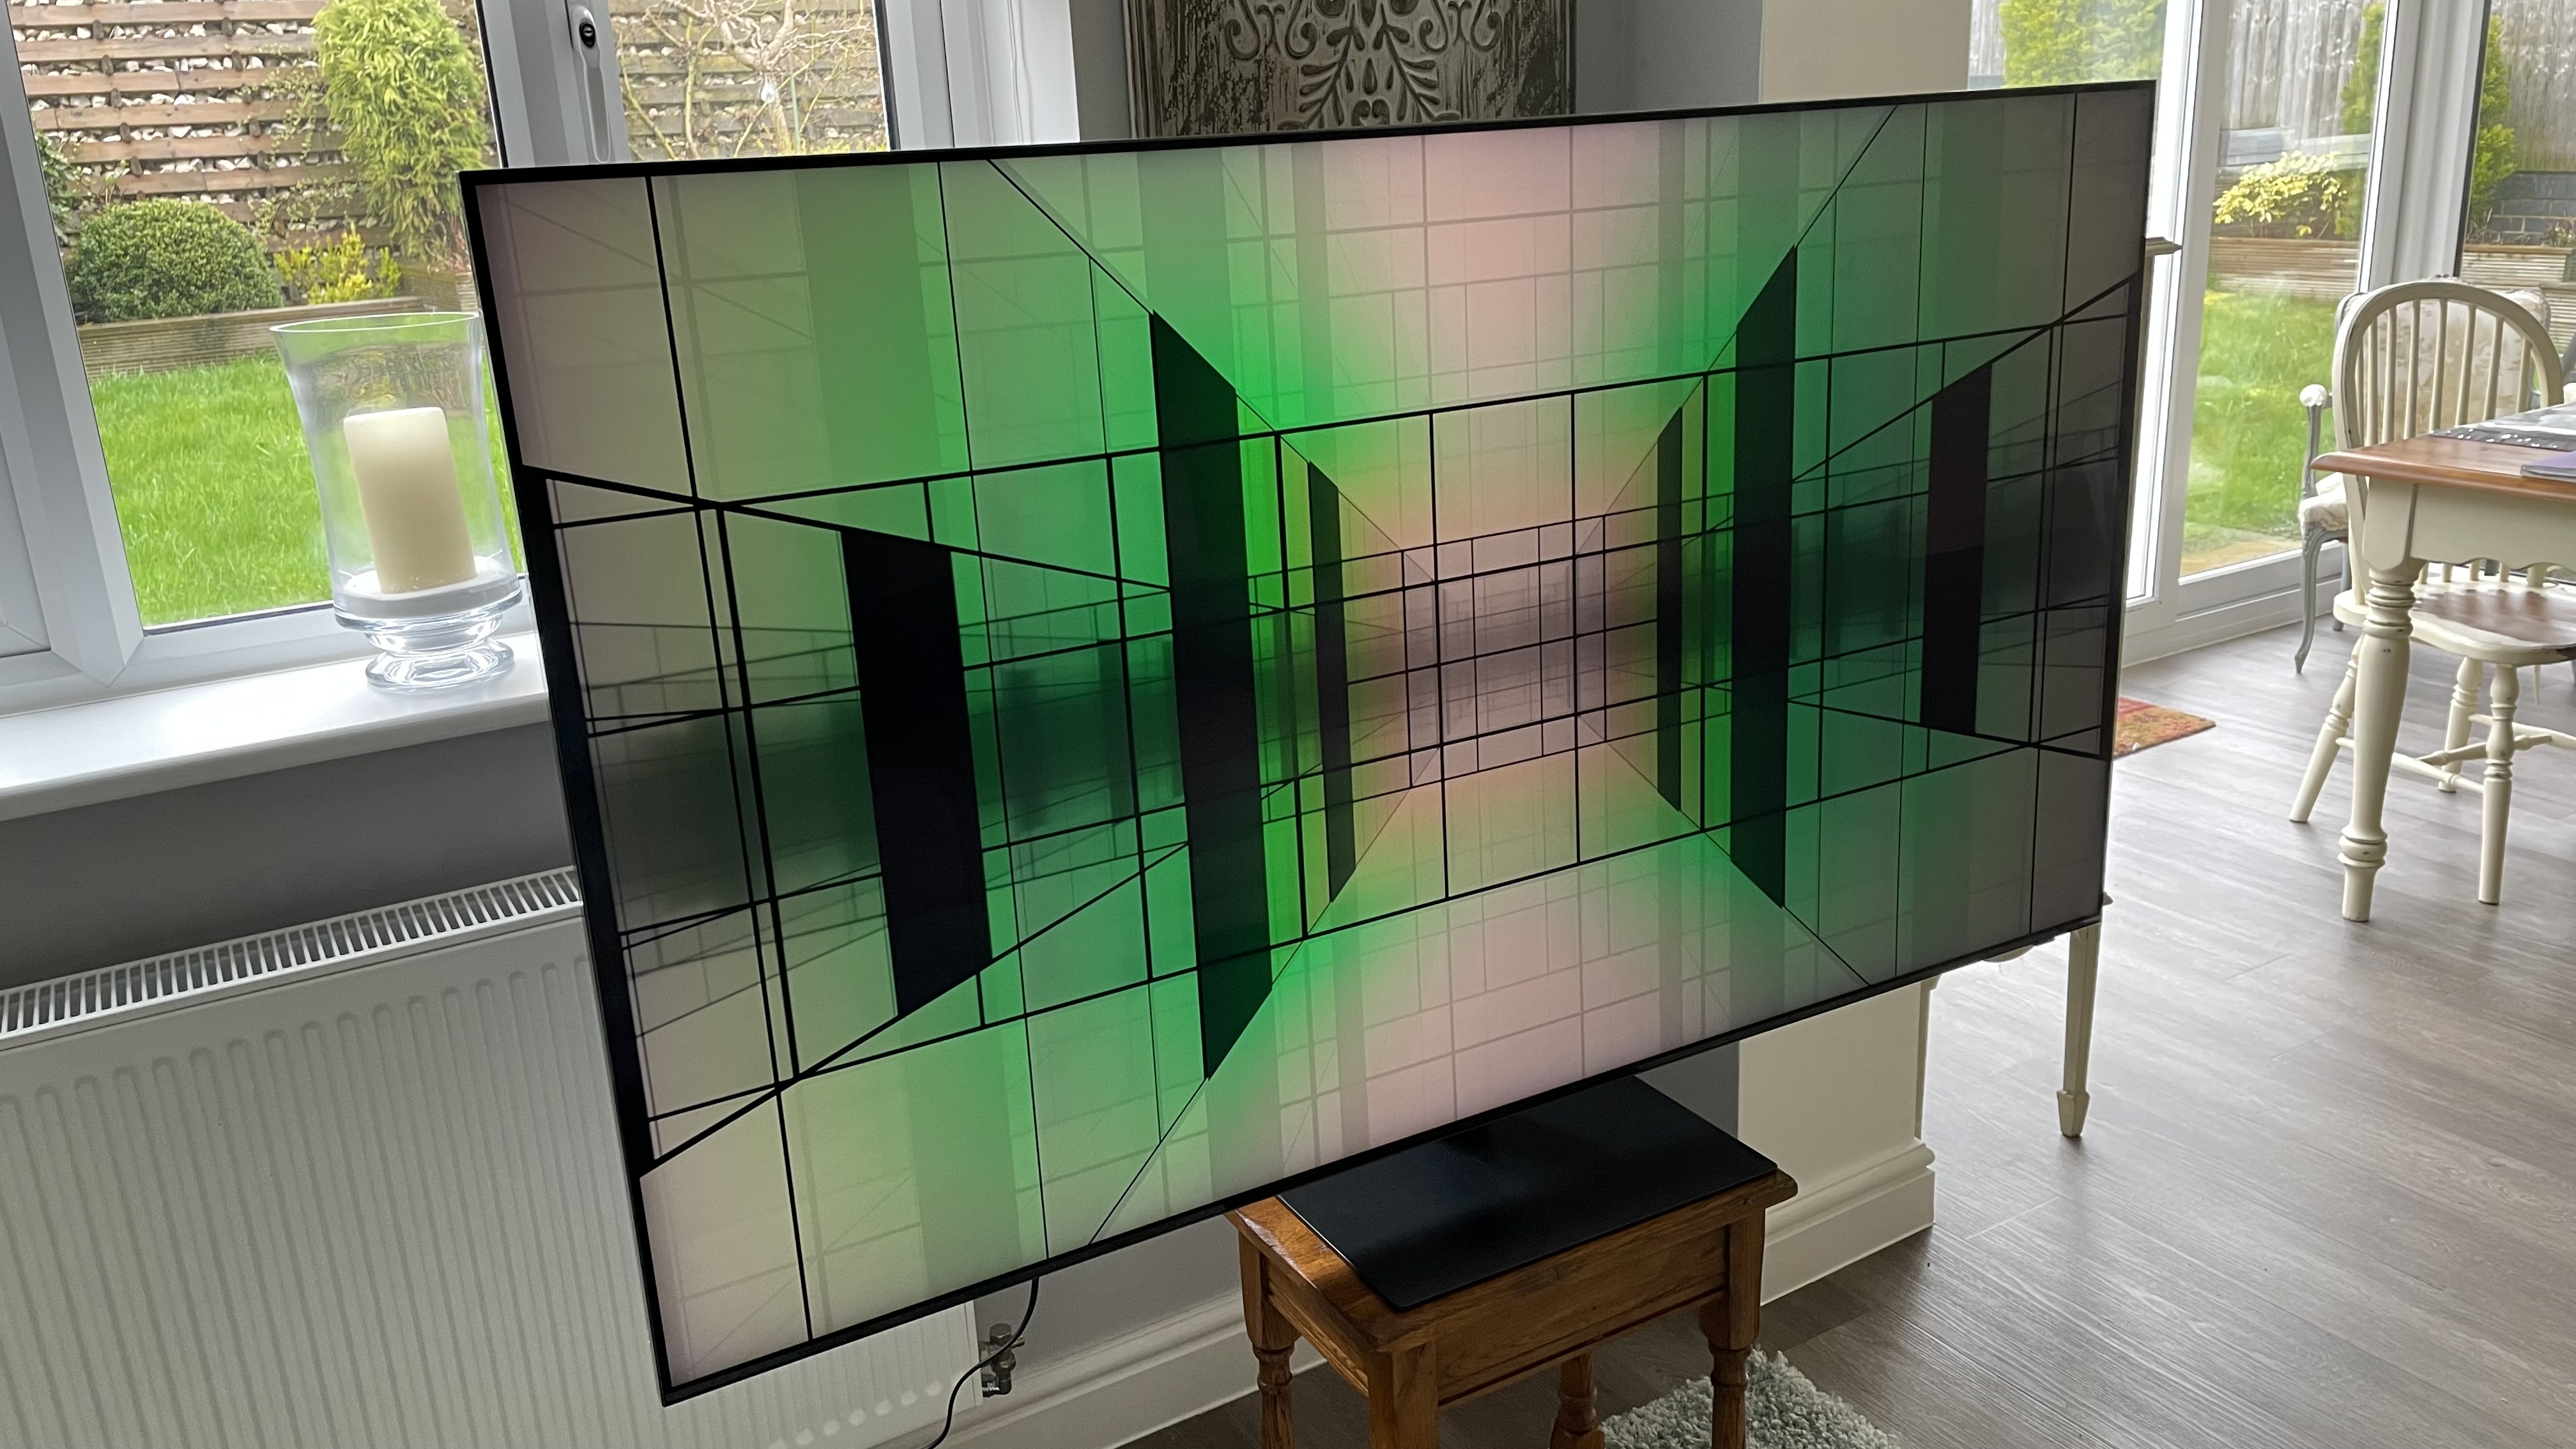 Samsung S95C OLED TV on stand showing abstract  image  onscreen